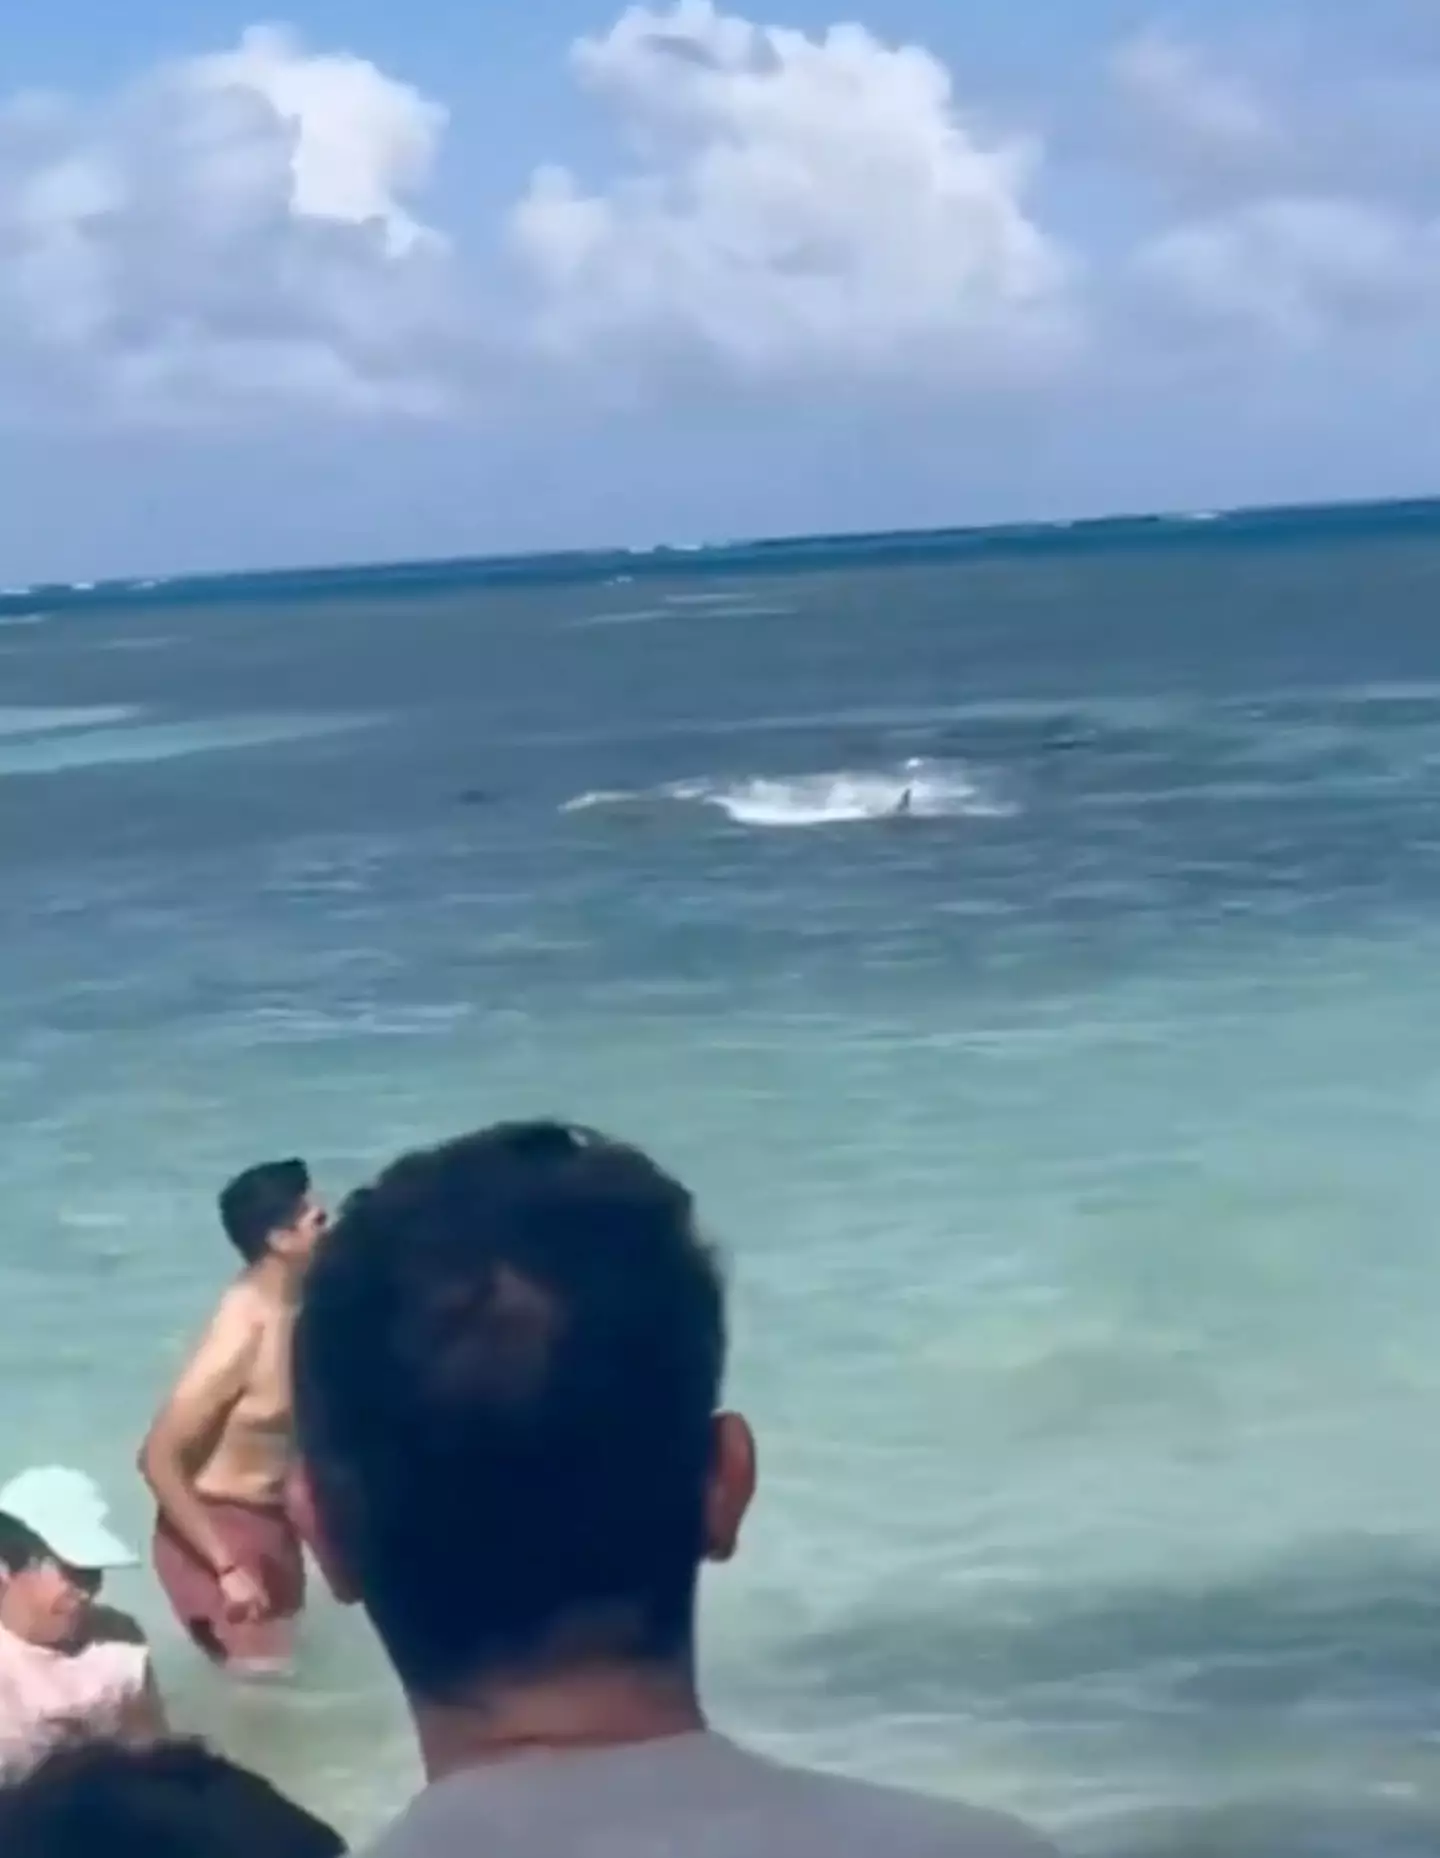 People frantically fled the water as the creature attacked a manta ray.